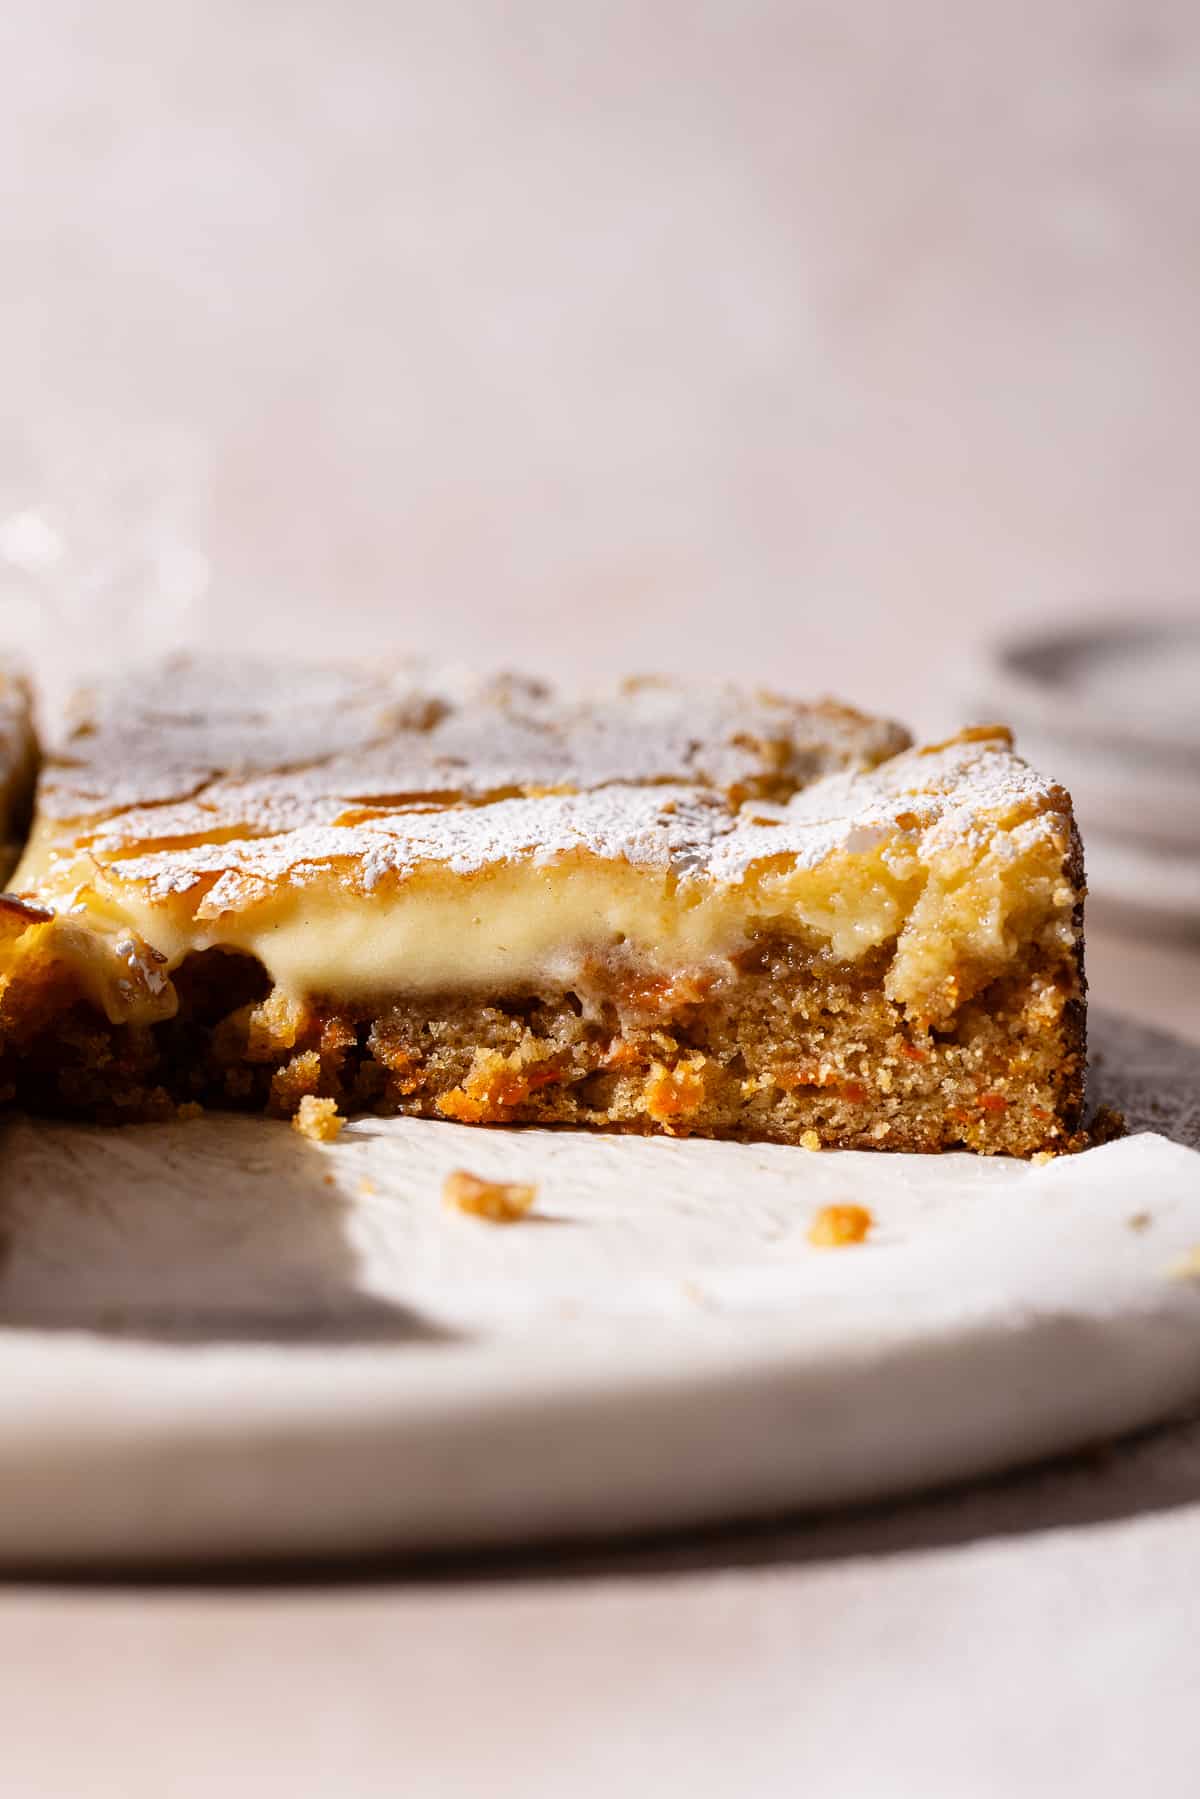 A slice of Gooey Butter Carrot Cake on the side.